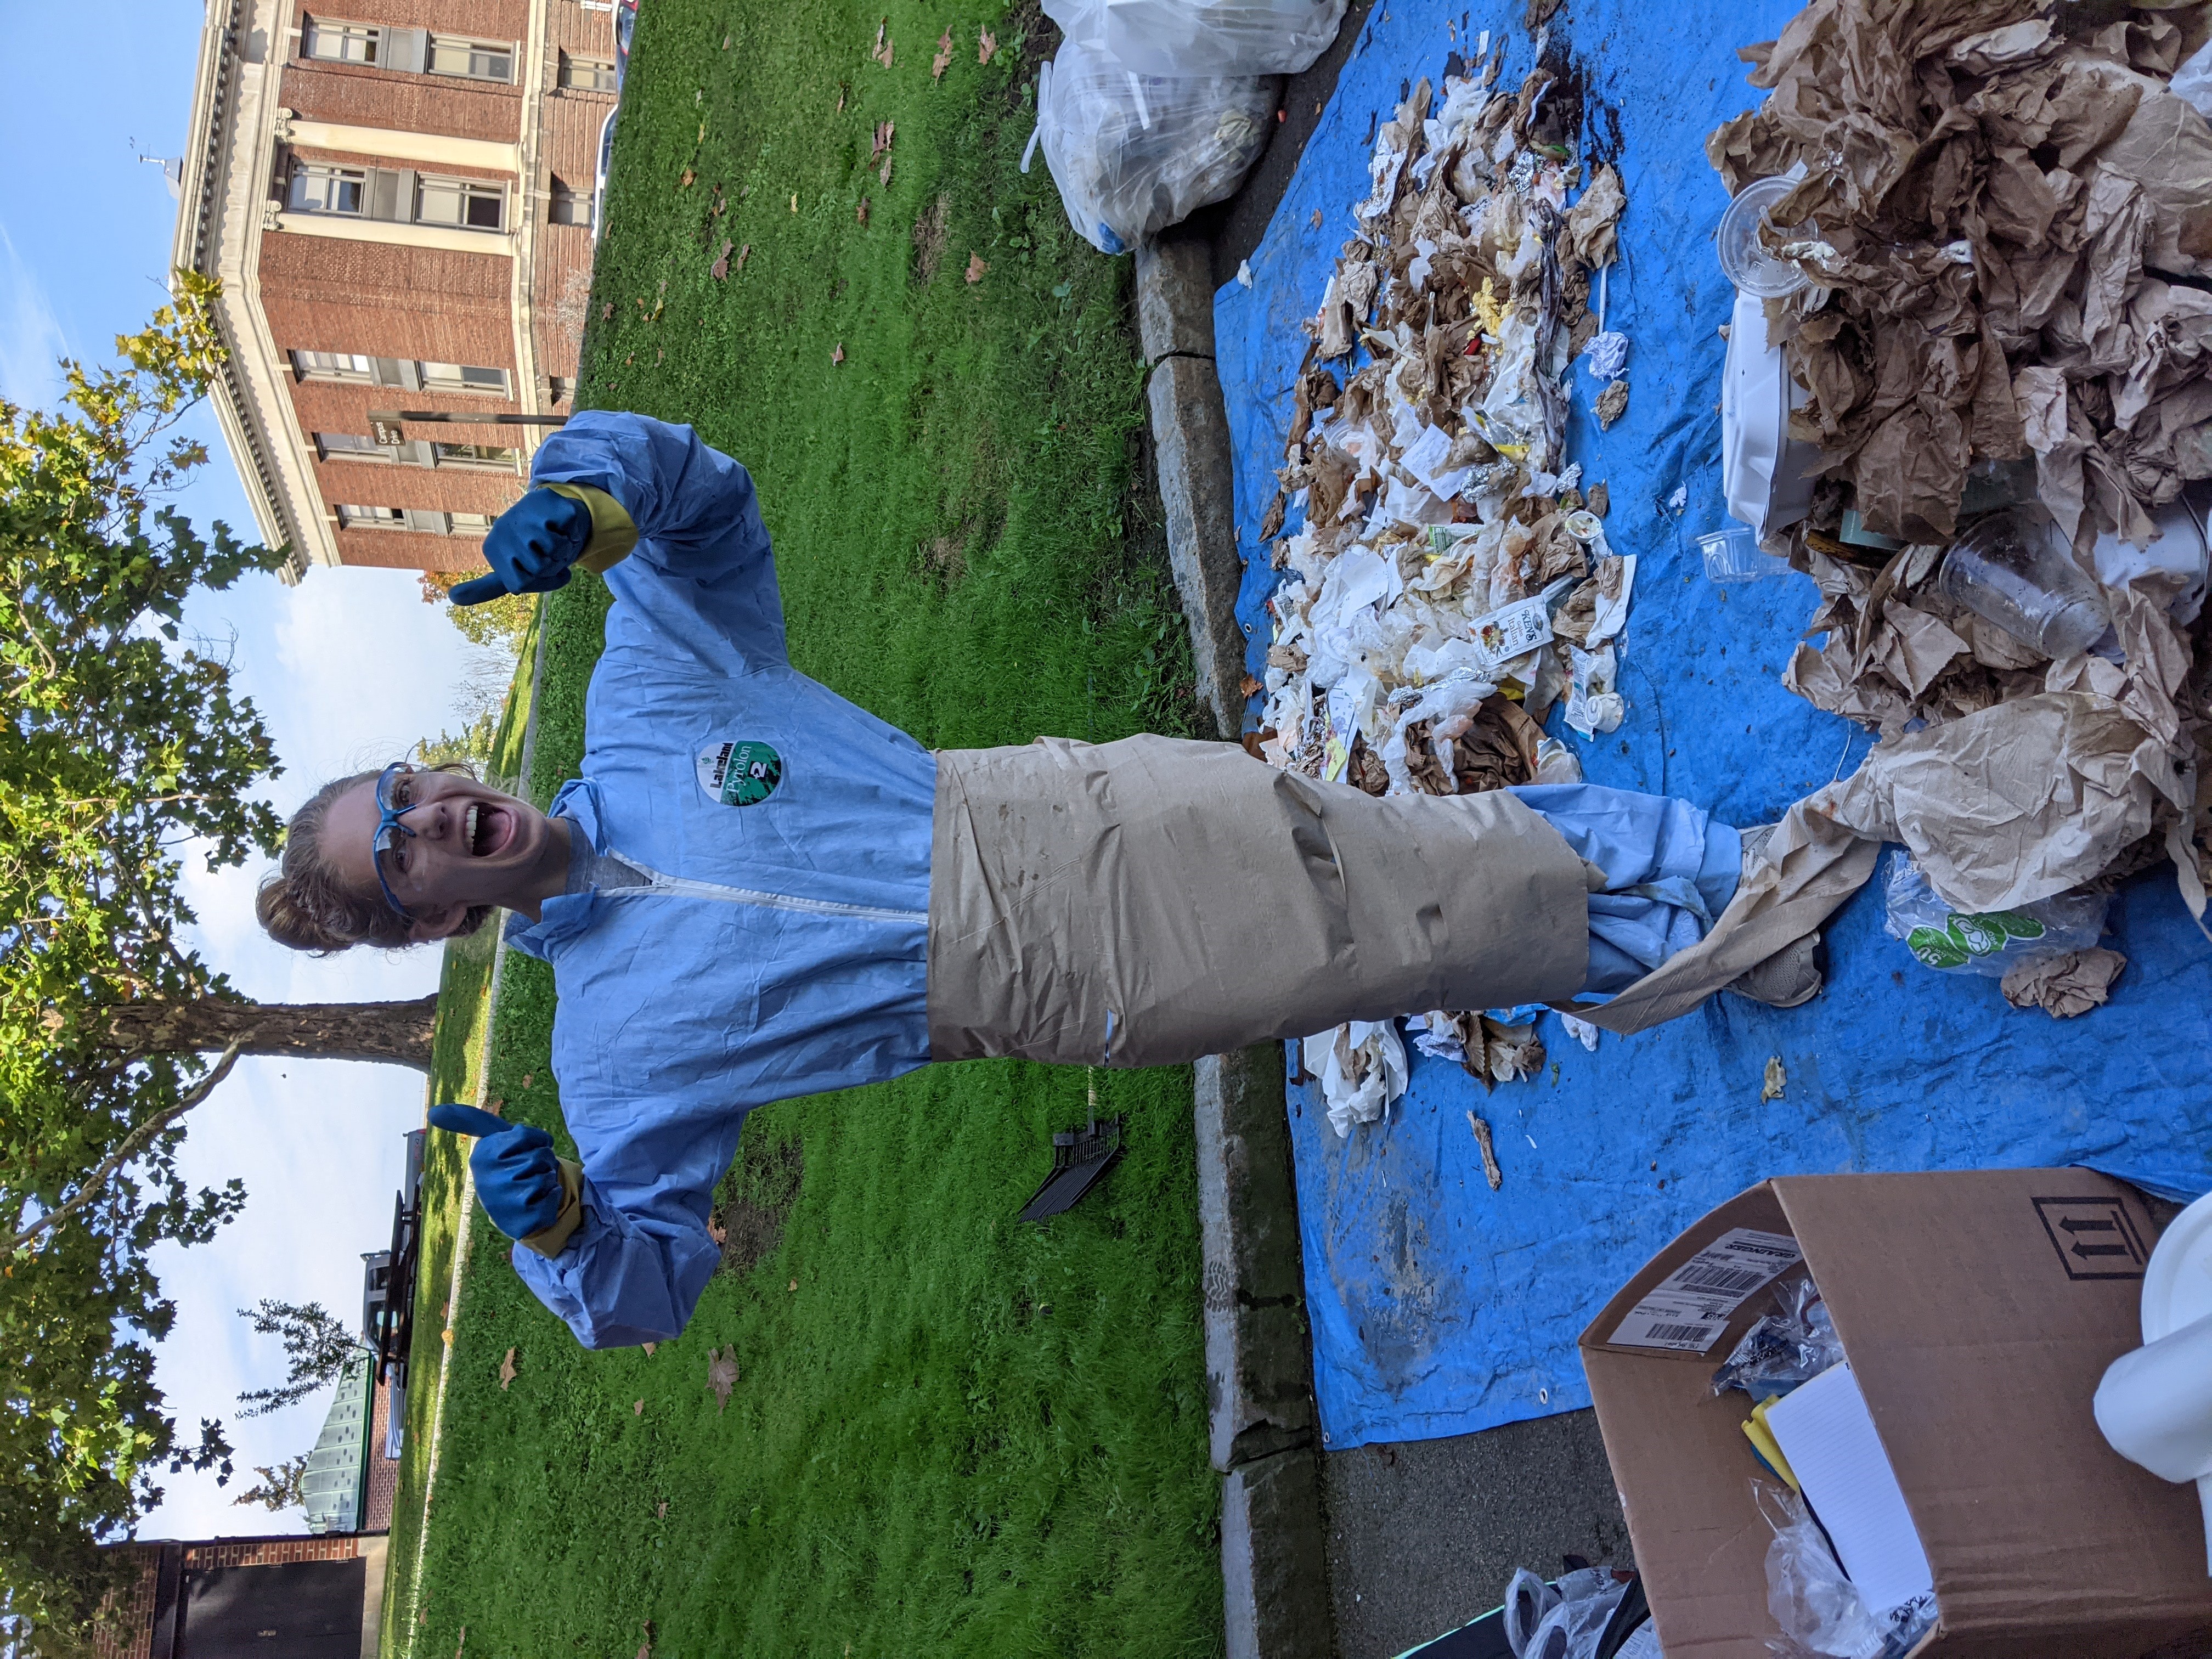 Club member wrapped in paper towels while conducting waste audit. Smiling, giving thumbs up